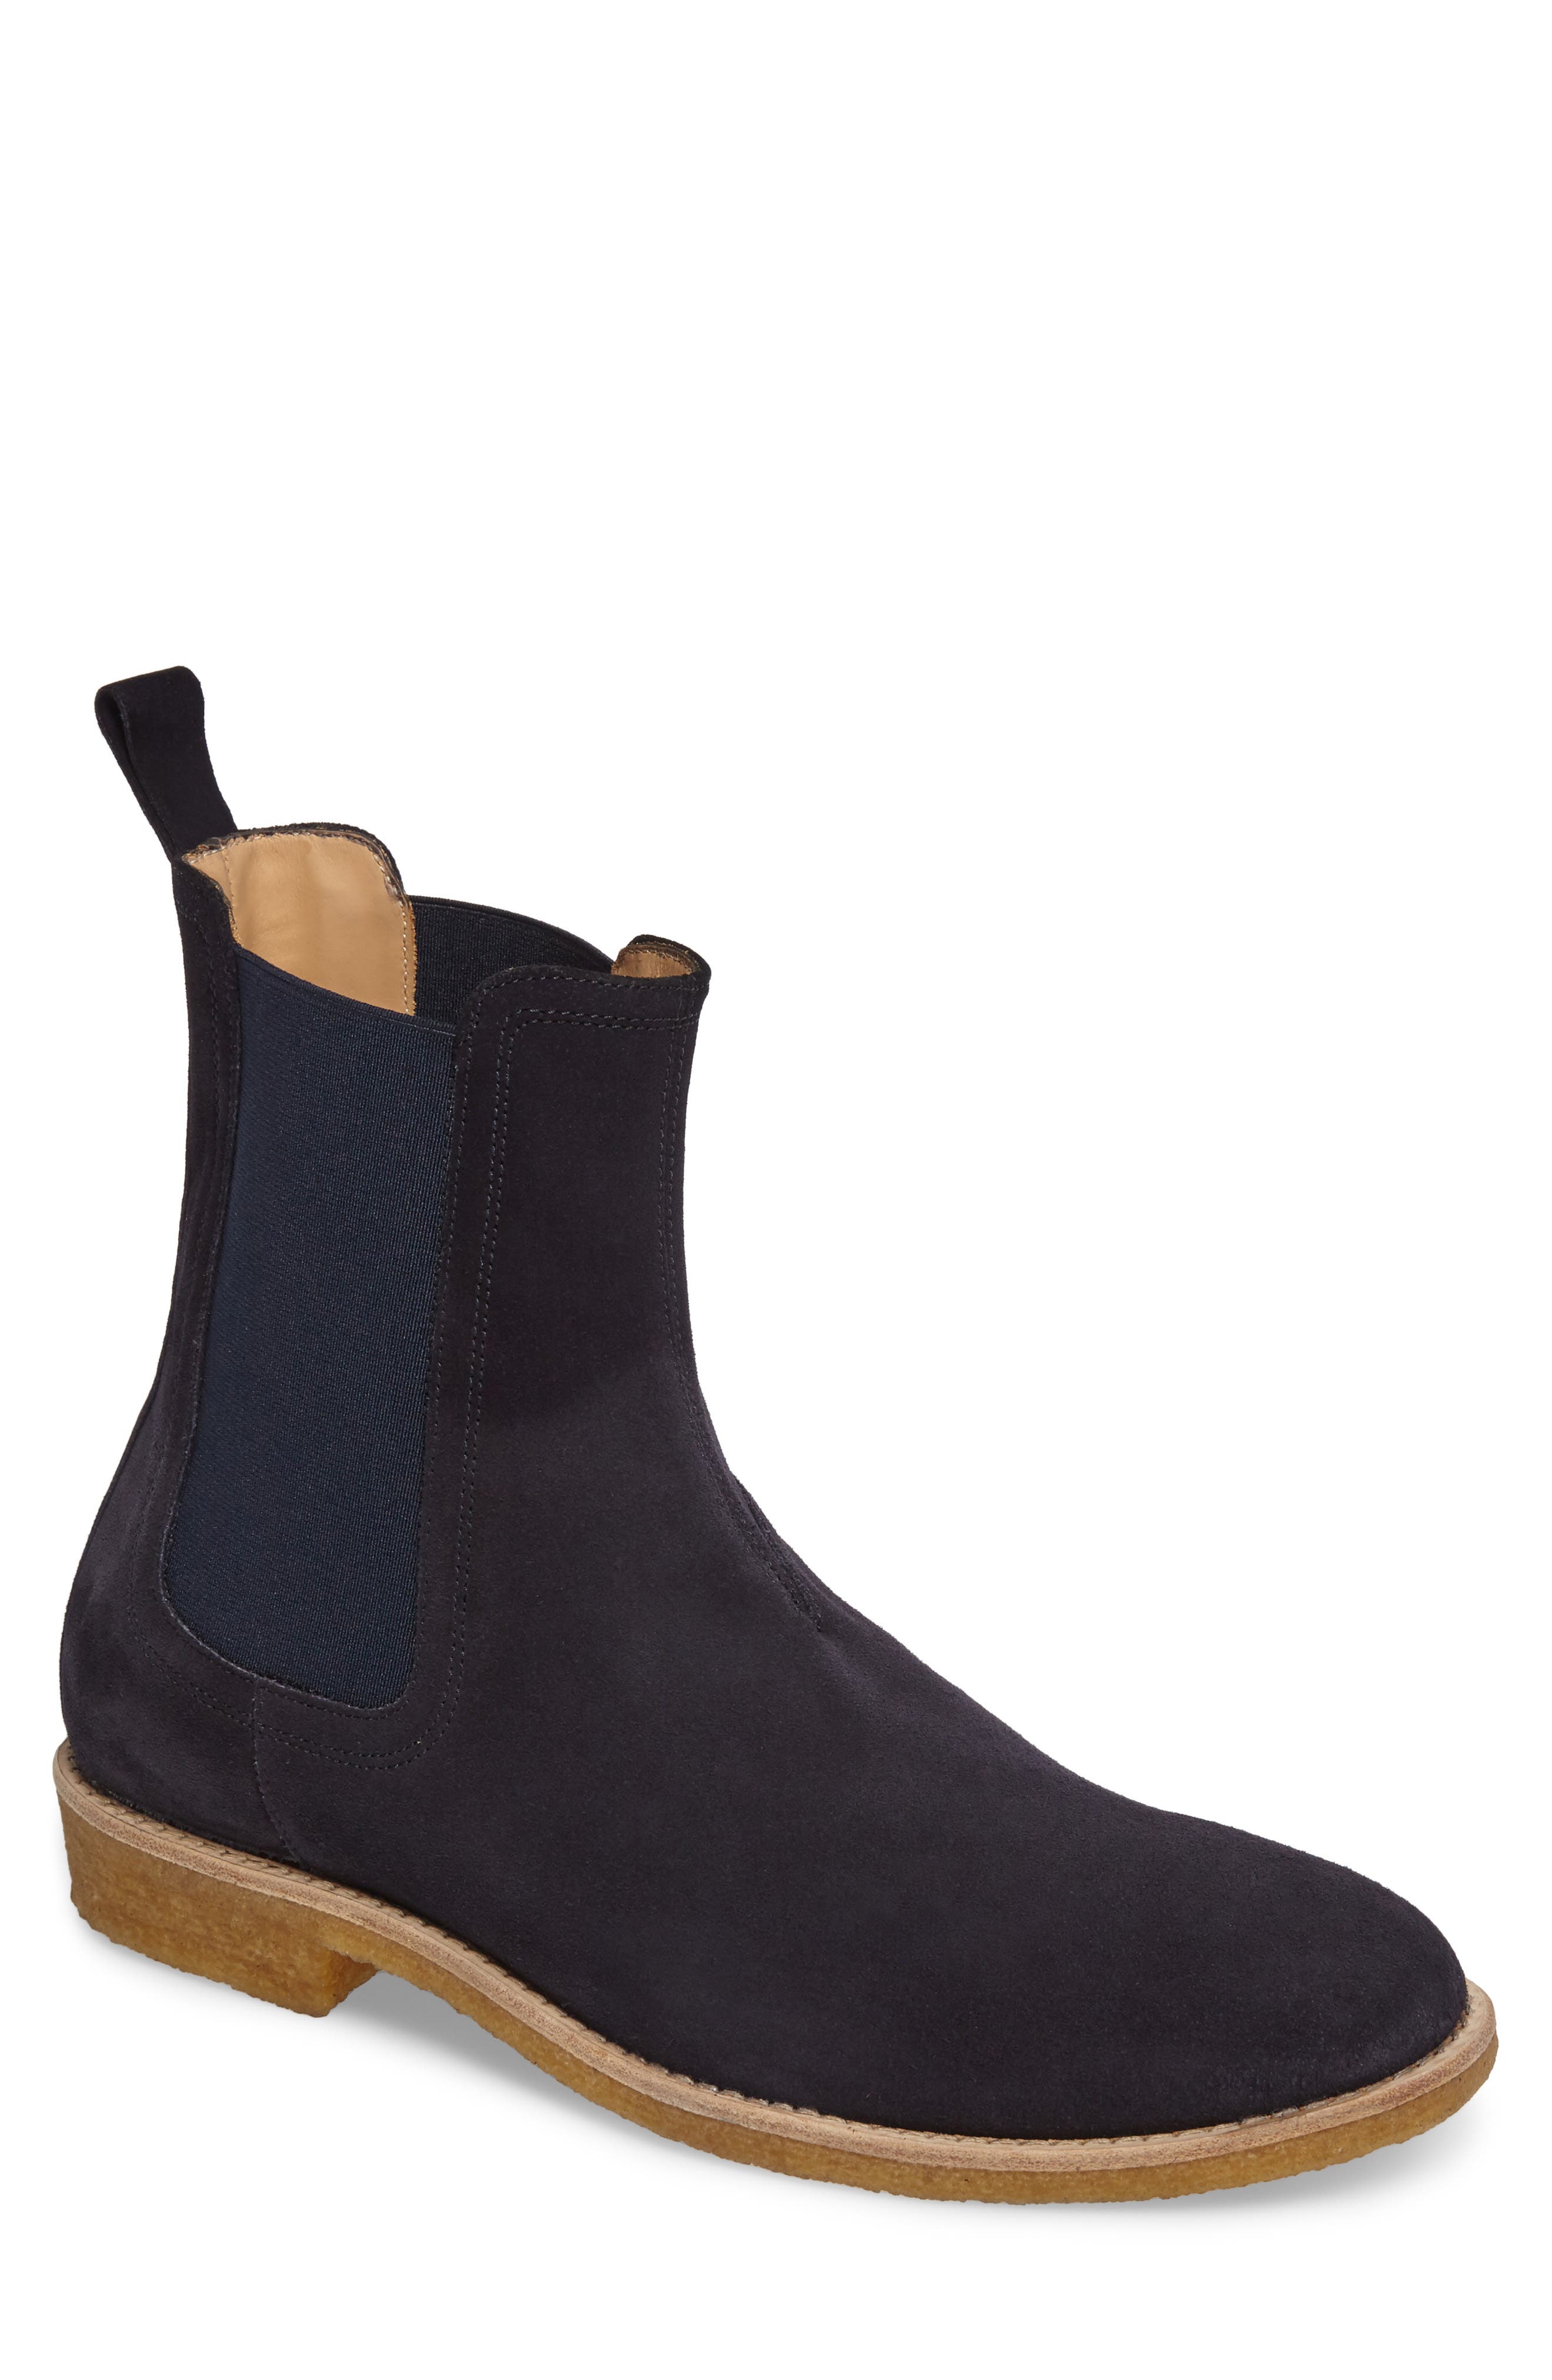 represent clothing chelsea boots